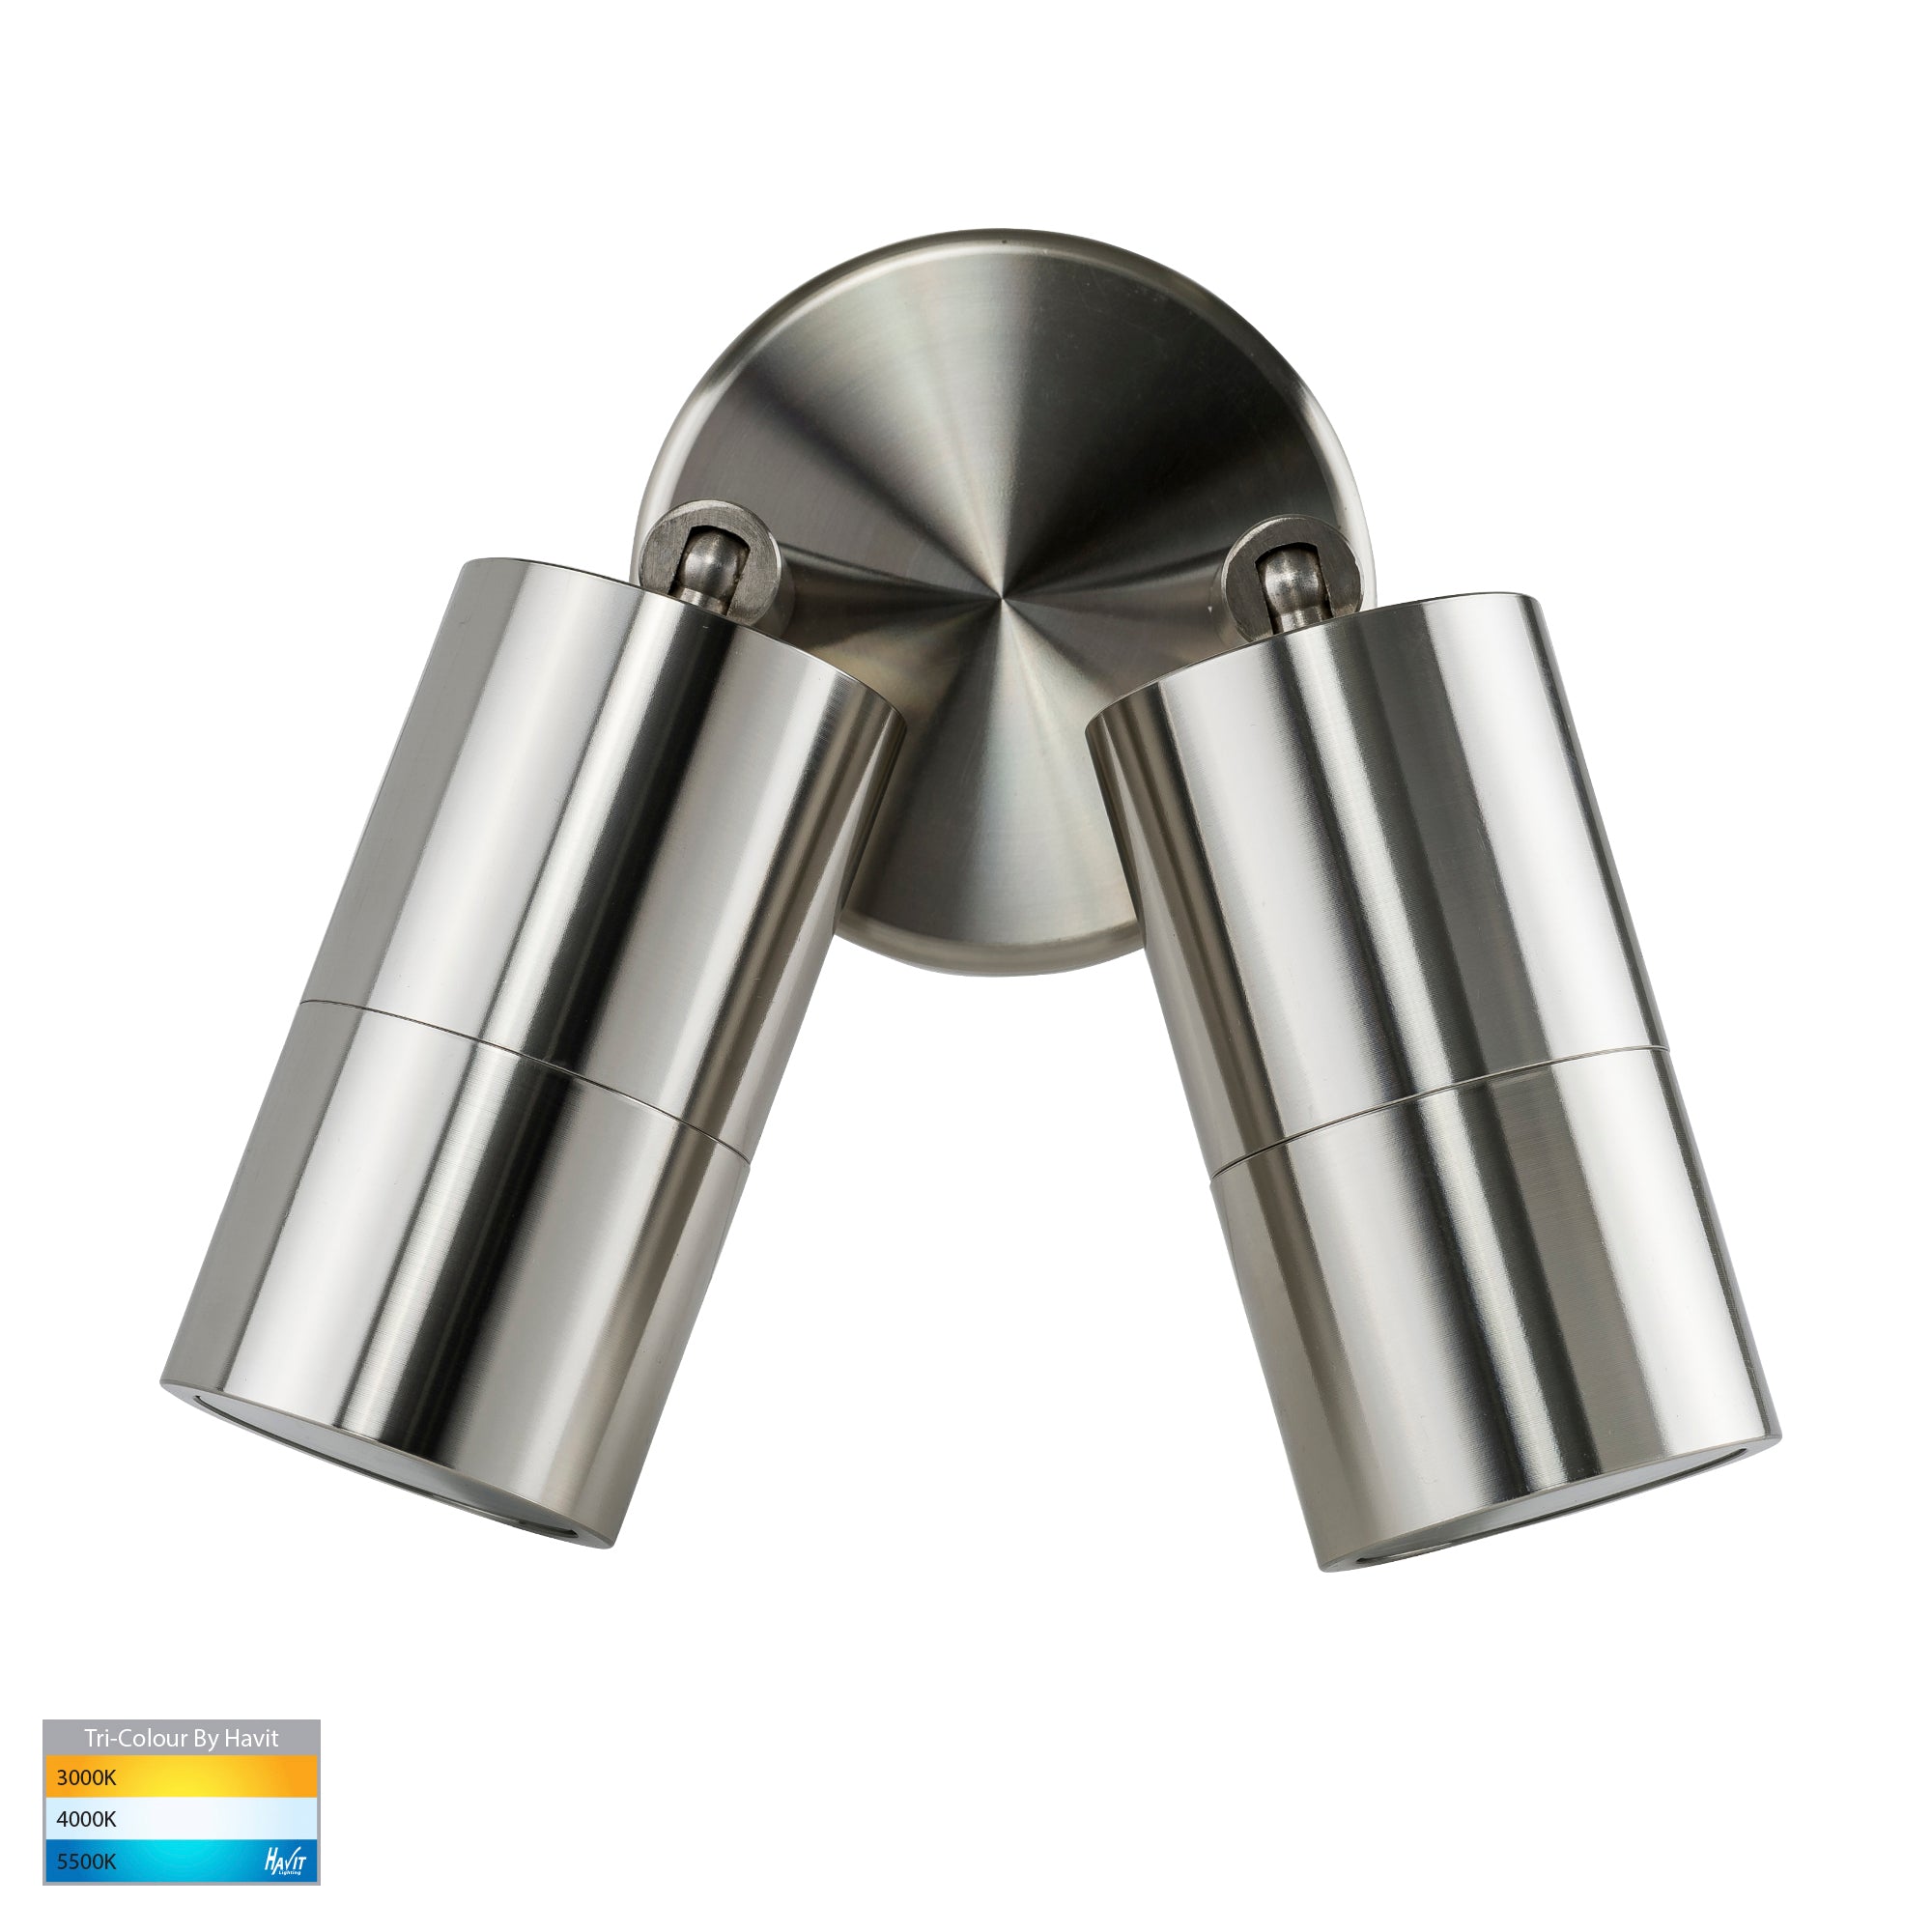 HV1305T-HV1307T - Tivah 316 Stainless Steel TRI Colour Double Adjustable Wall Pillar Lights